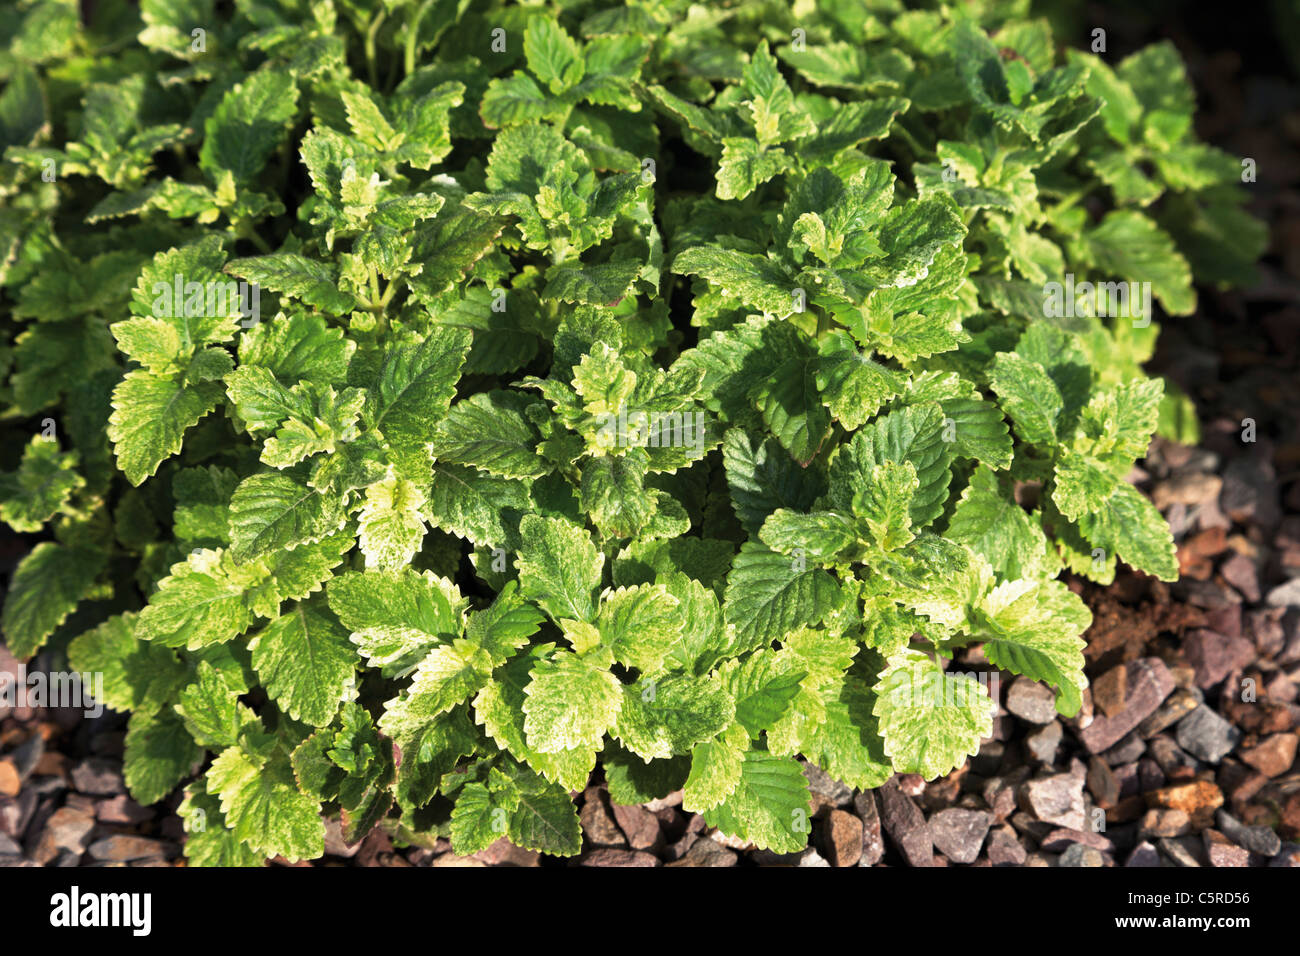 Germany, Close up of calamint plant Stock Photo